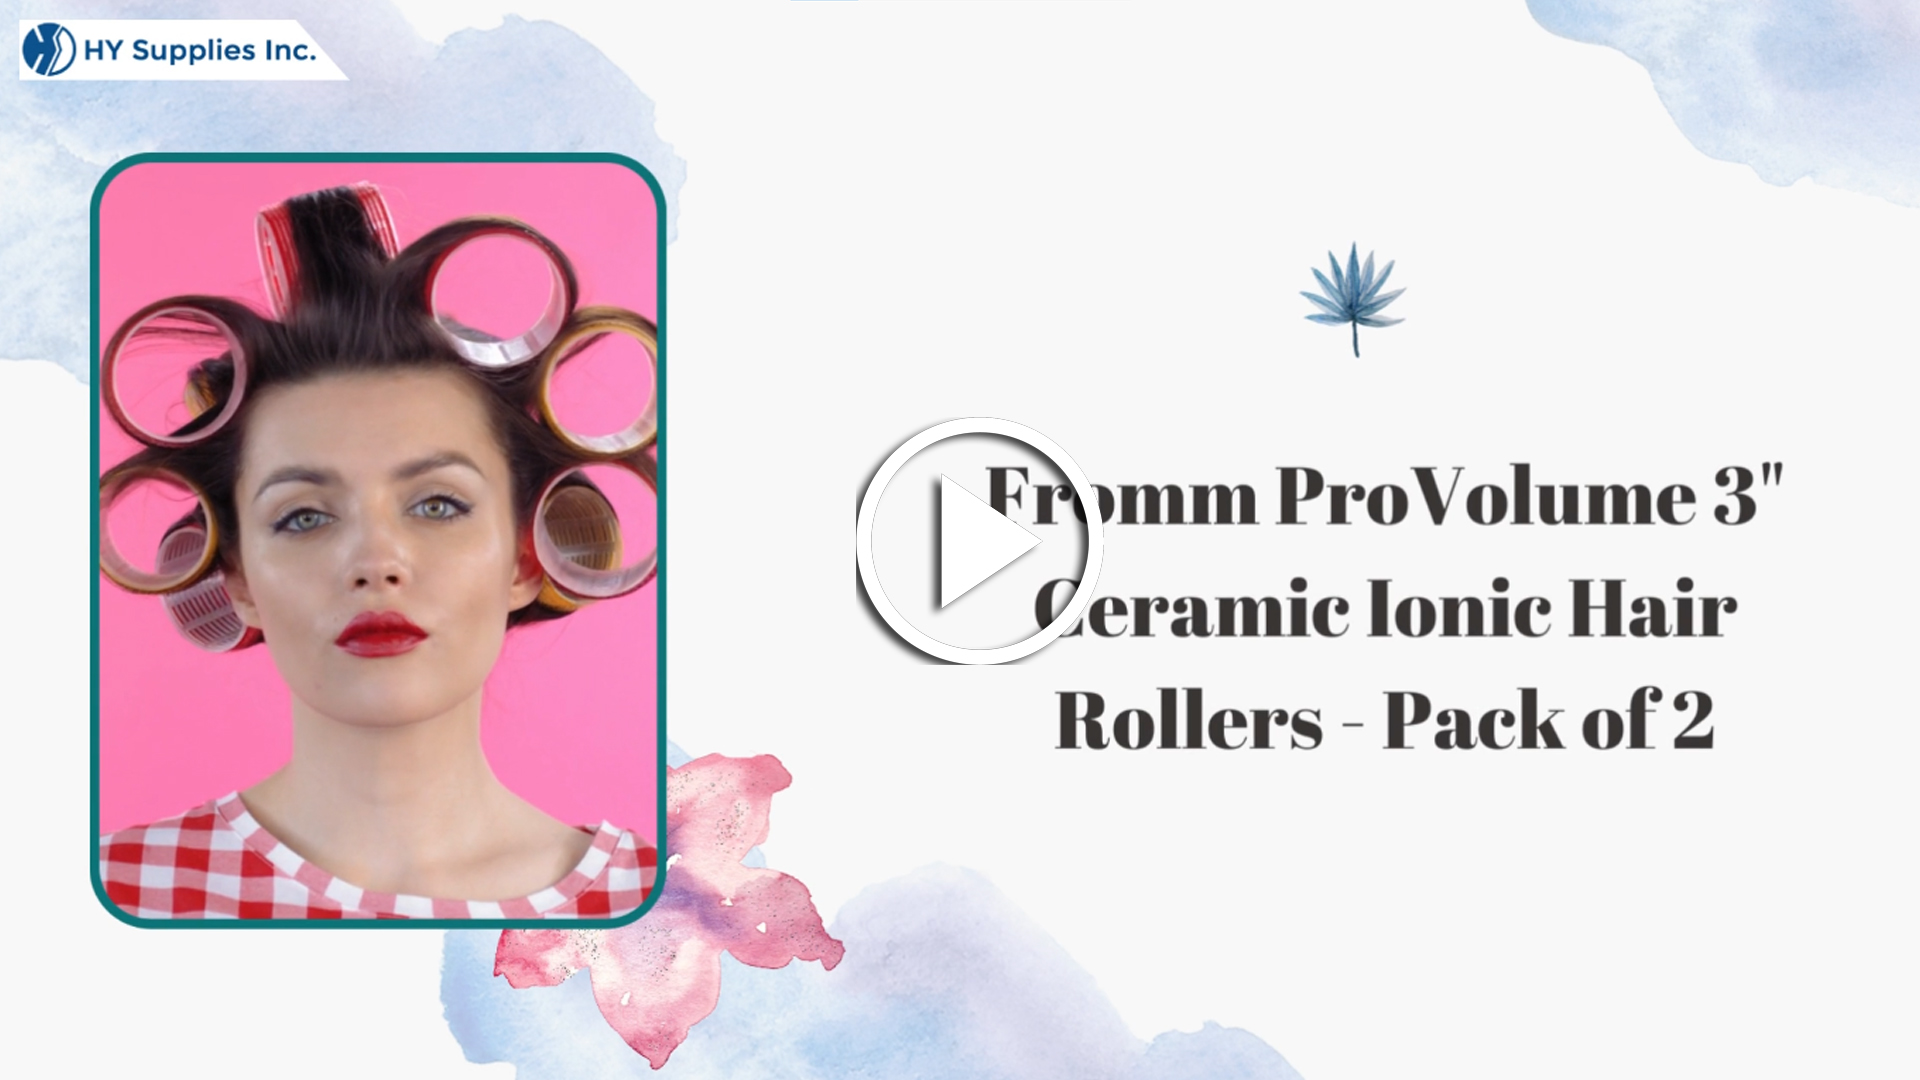 Fromm ProVolume 3" Ceramic Ionic Hair Rollers - Pack of 2